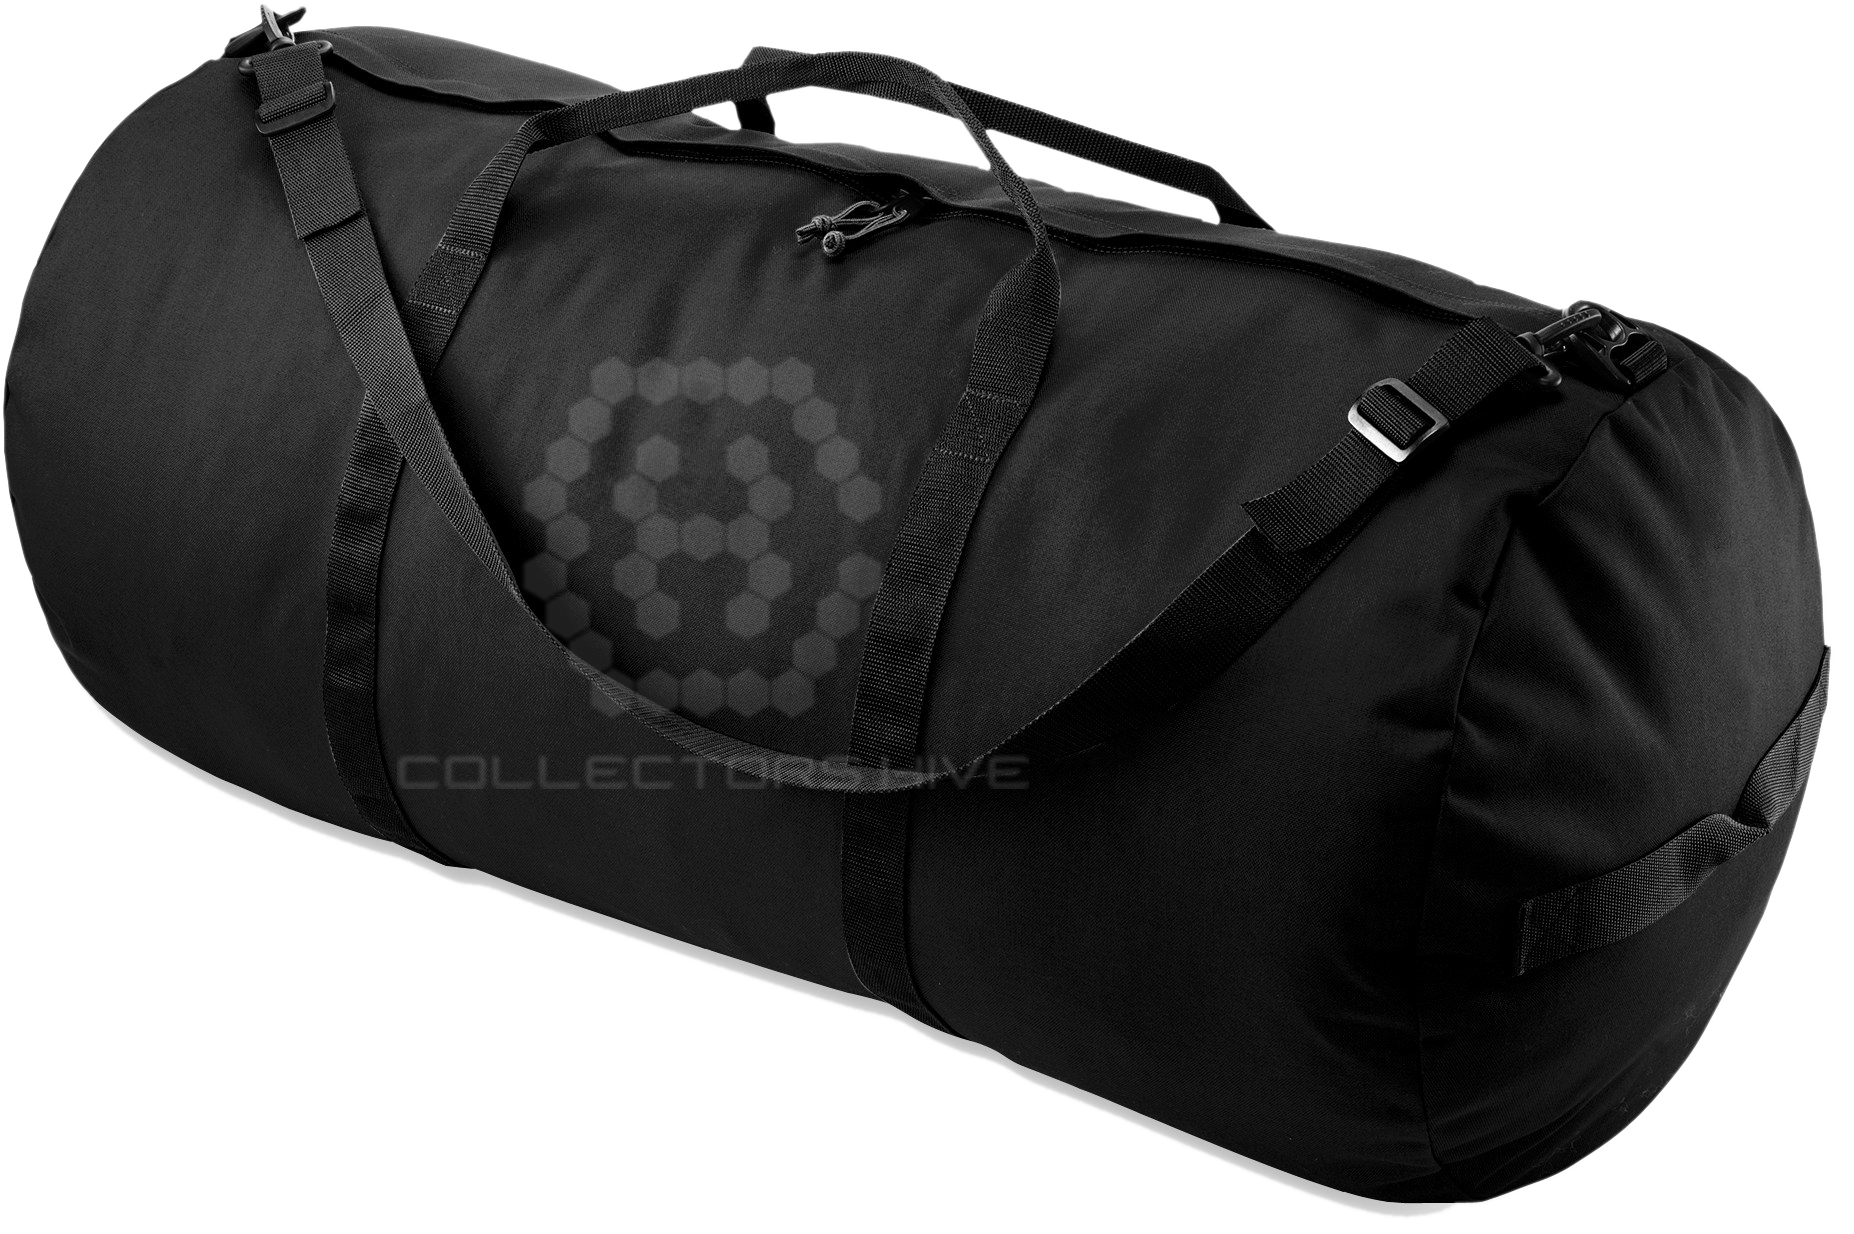 atlethic bags